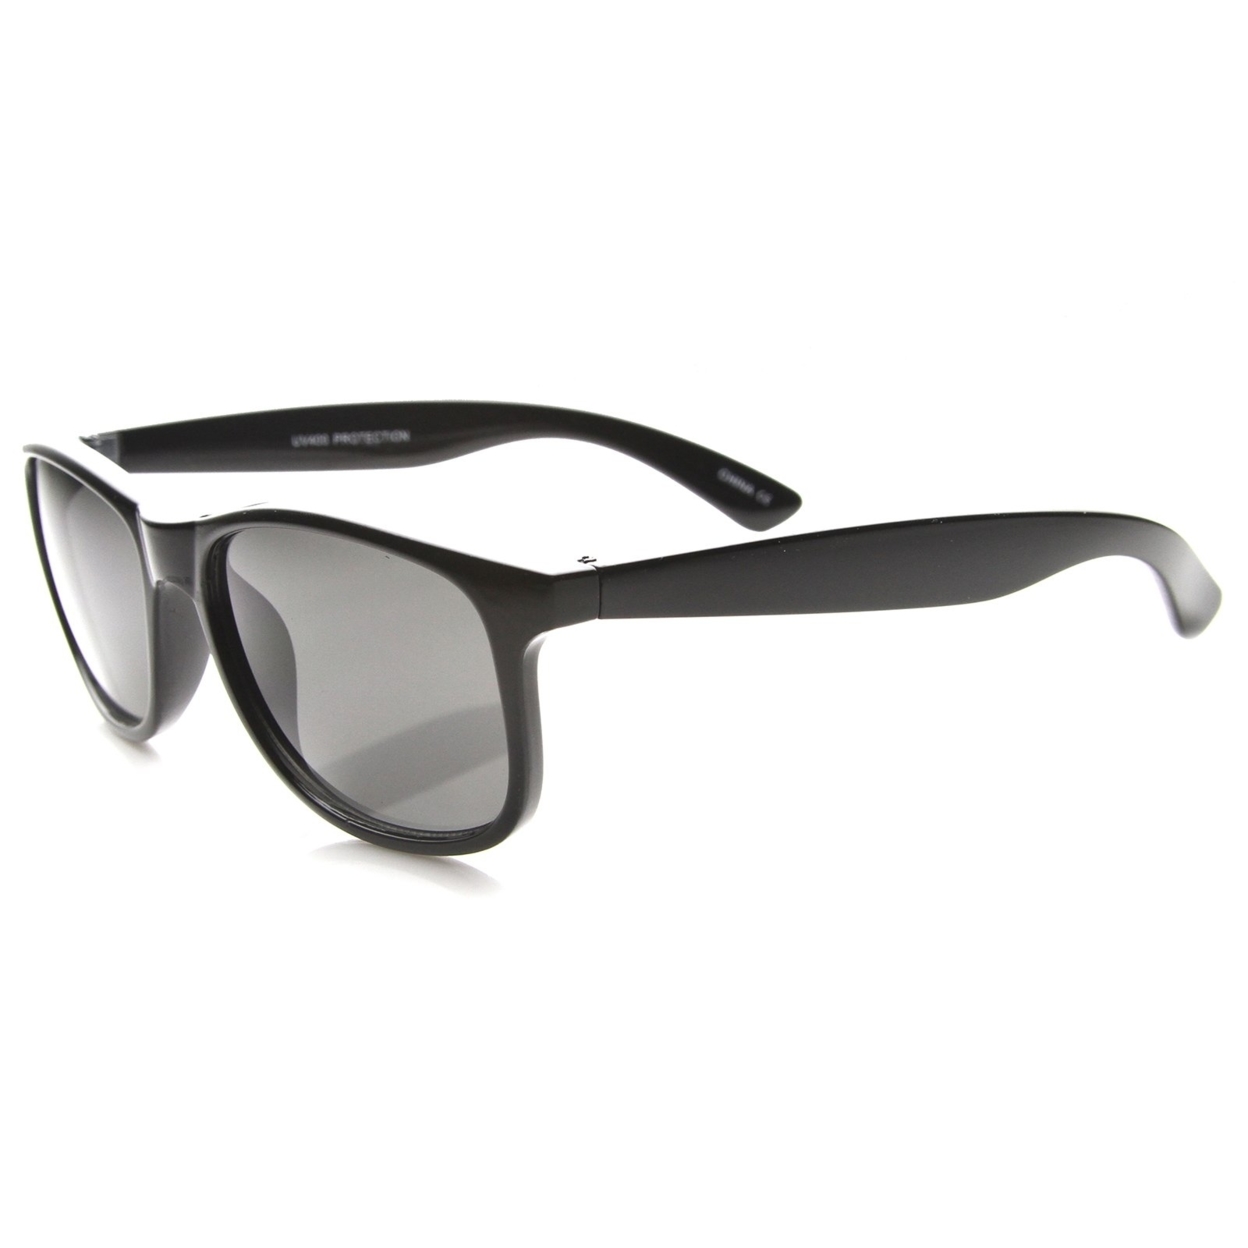 Womens Horn Rimmed Sunglasses With UV400 Protected Composite Lens - Shiny-Black / Smoke